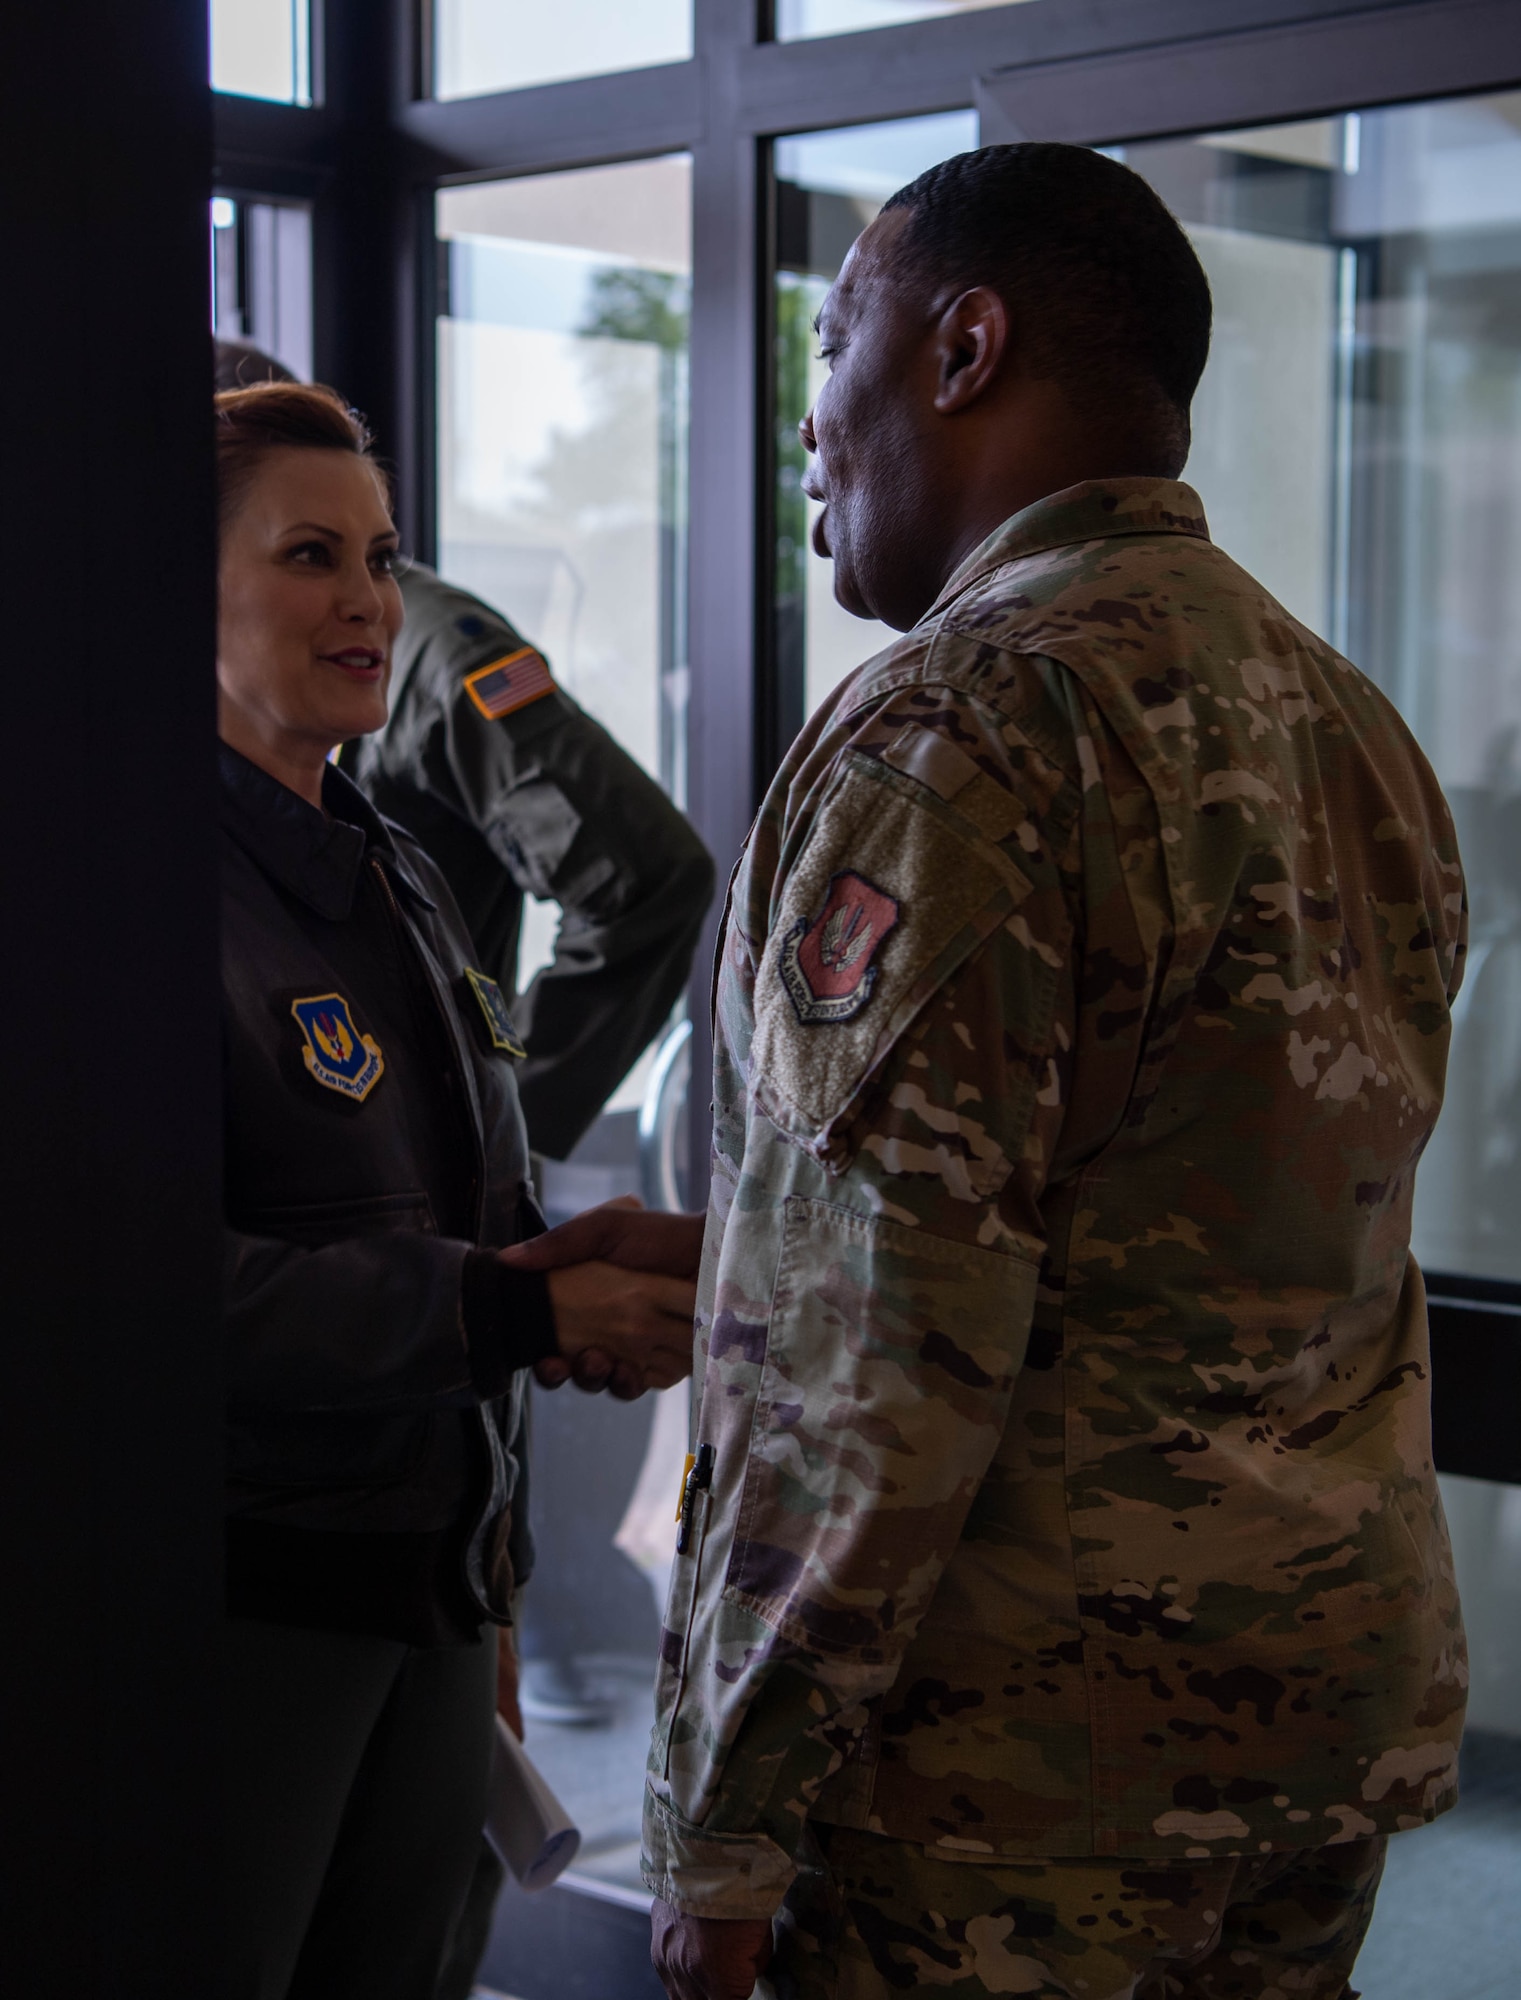 U.S. Air Force Brig. Gen. Ottis C. Jones, 86th Airlift Wing commander, right, greets Michigan Gov. Gretchen Whitmer, left, during her tour of the 86th Headquarters building at Ramstein Air Base, Germany, June 22, 2023.